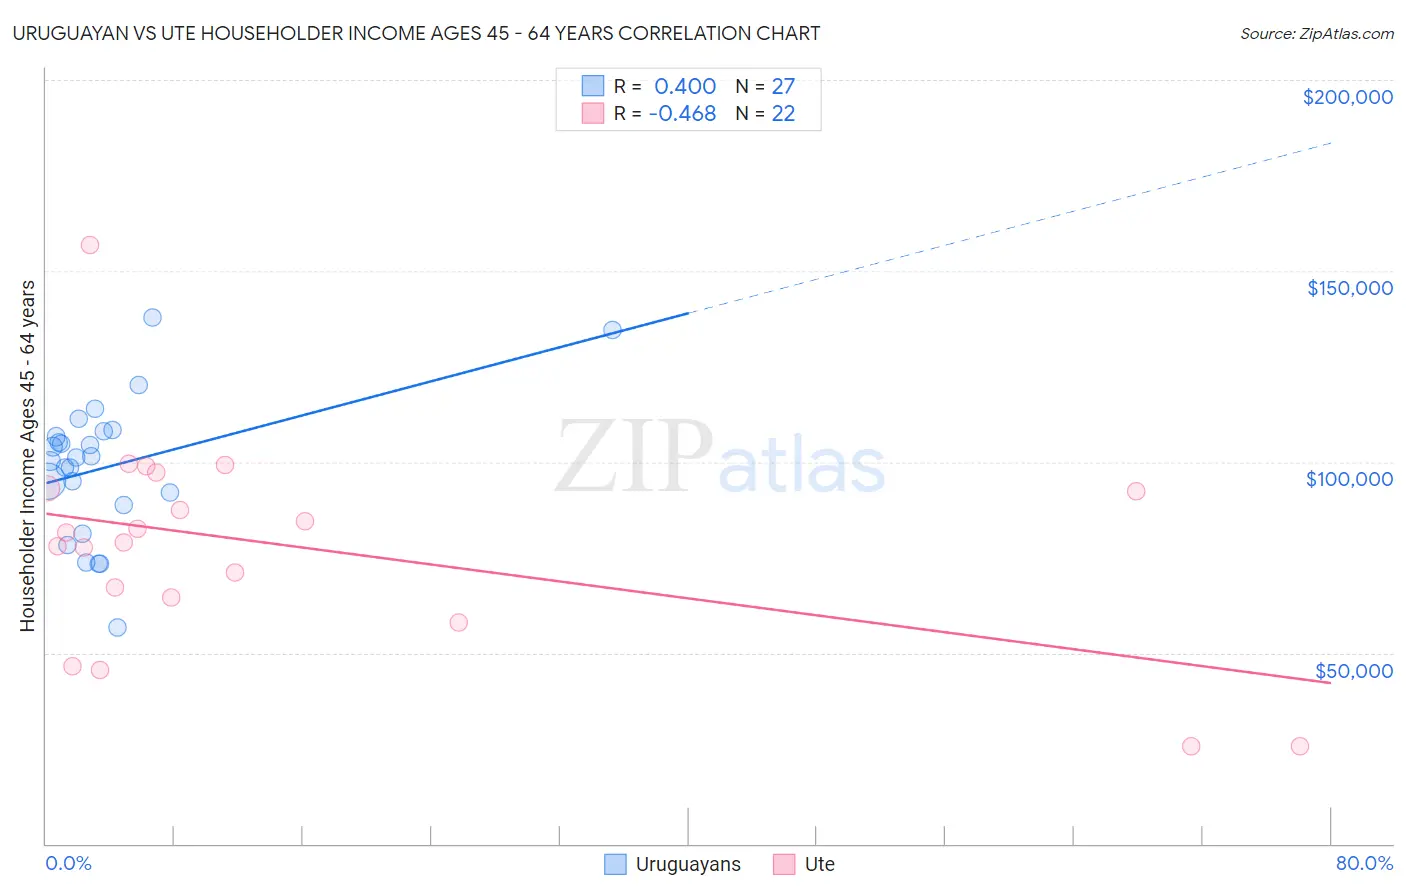 Uruguayan vs Ute Householder Income Ages 45 - 64 years